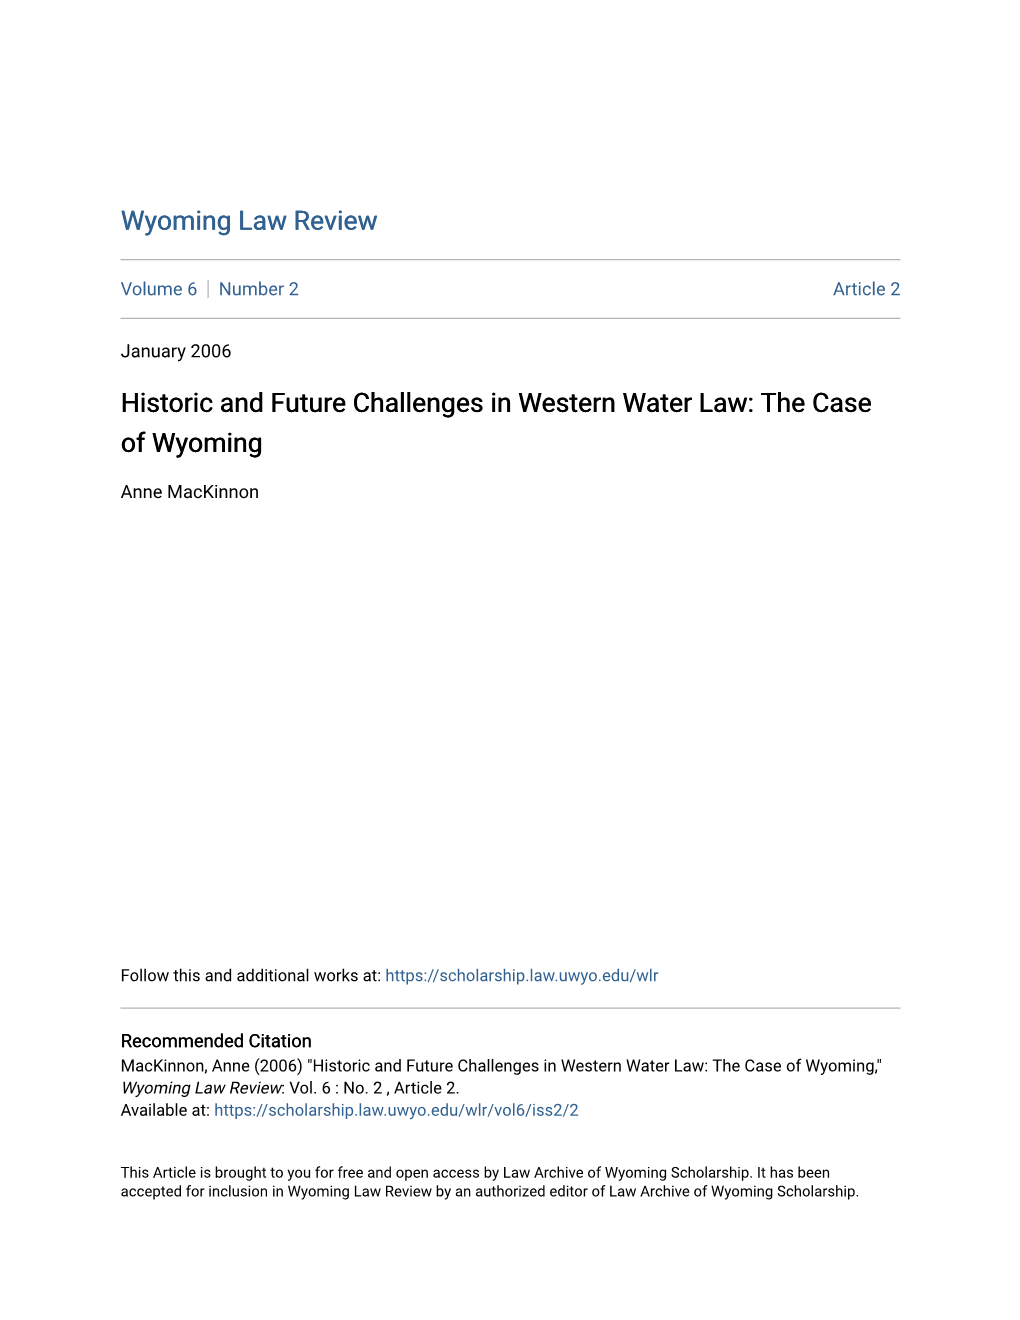 Historic and Future Challenges in Western Water Law: the Case of Wyoming